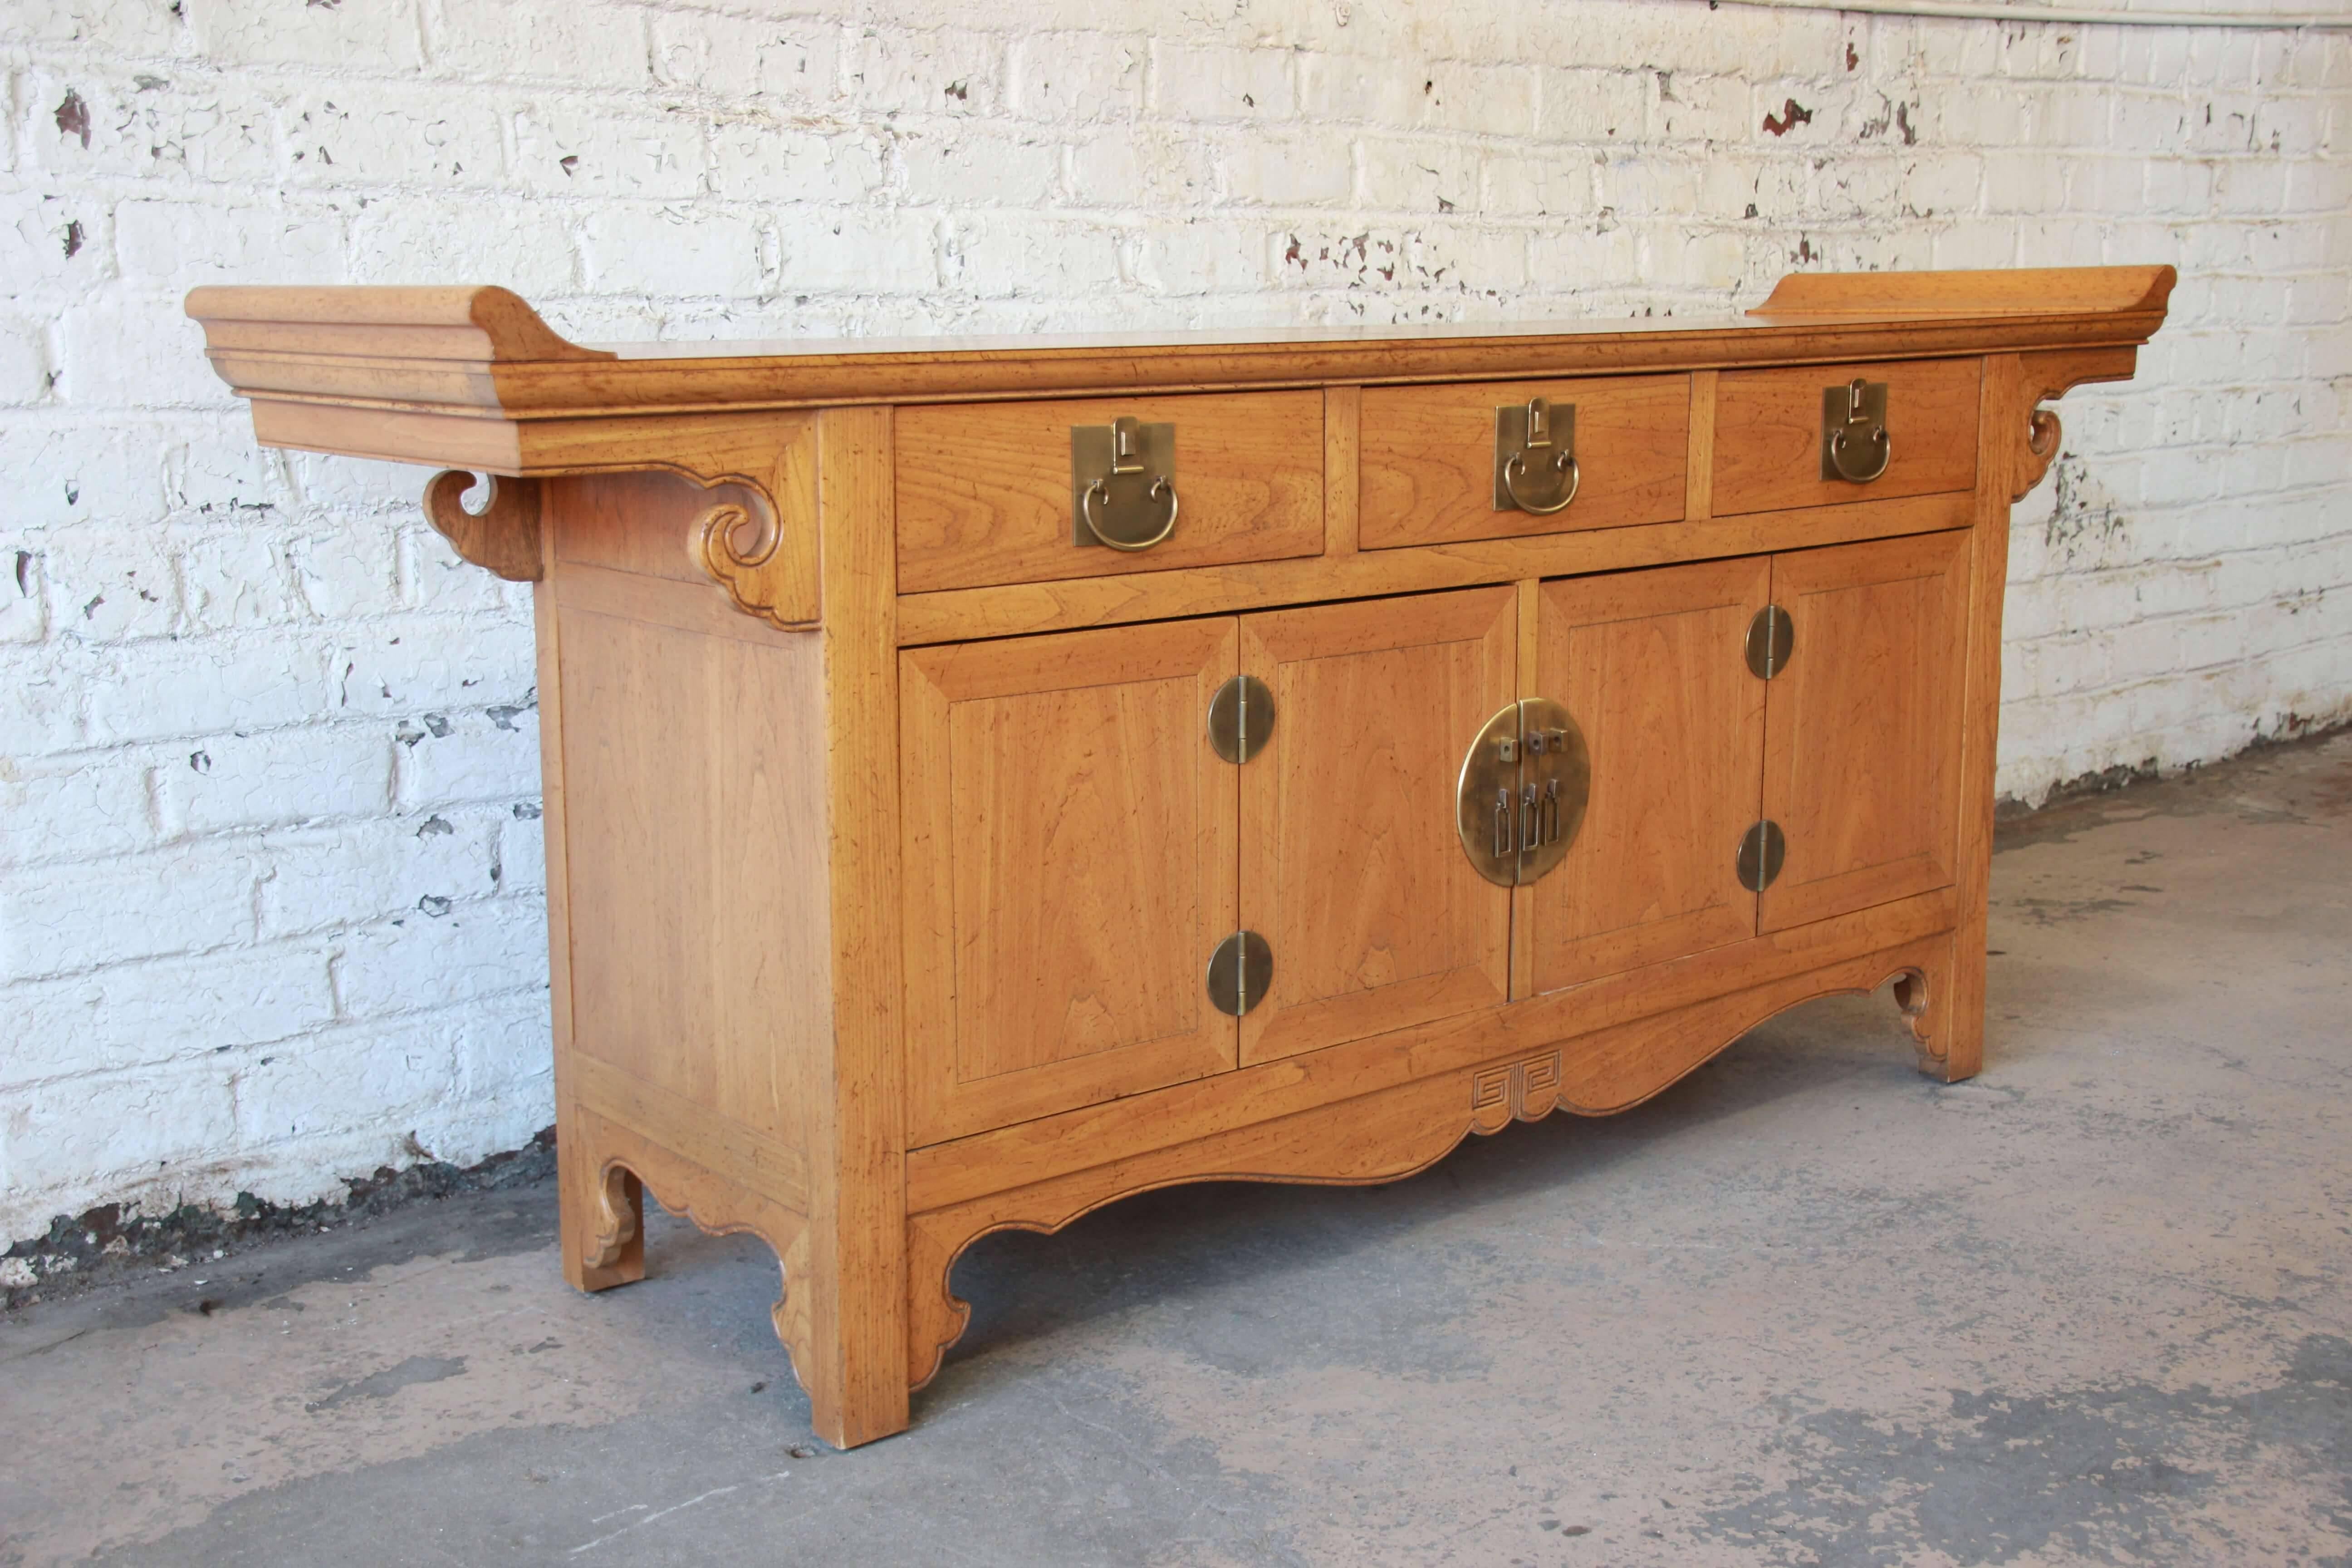 Offering a beautiful solid elmwood chinoiserie sideboard by Baker Furniture. This fantastic piece has brass hardware with Asian motifs and carvings. The top has elegant rolling edges with the piece featuring three large drawers directly below. Two